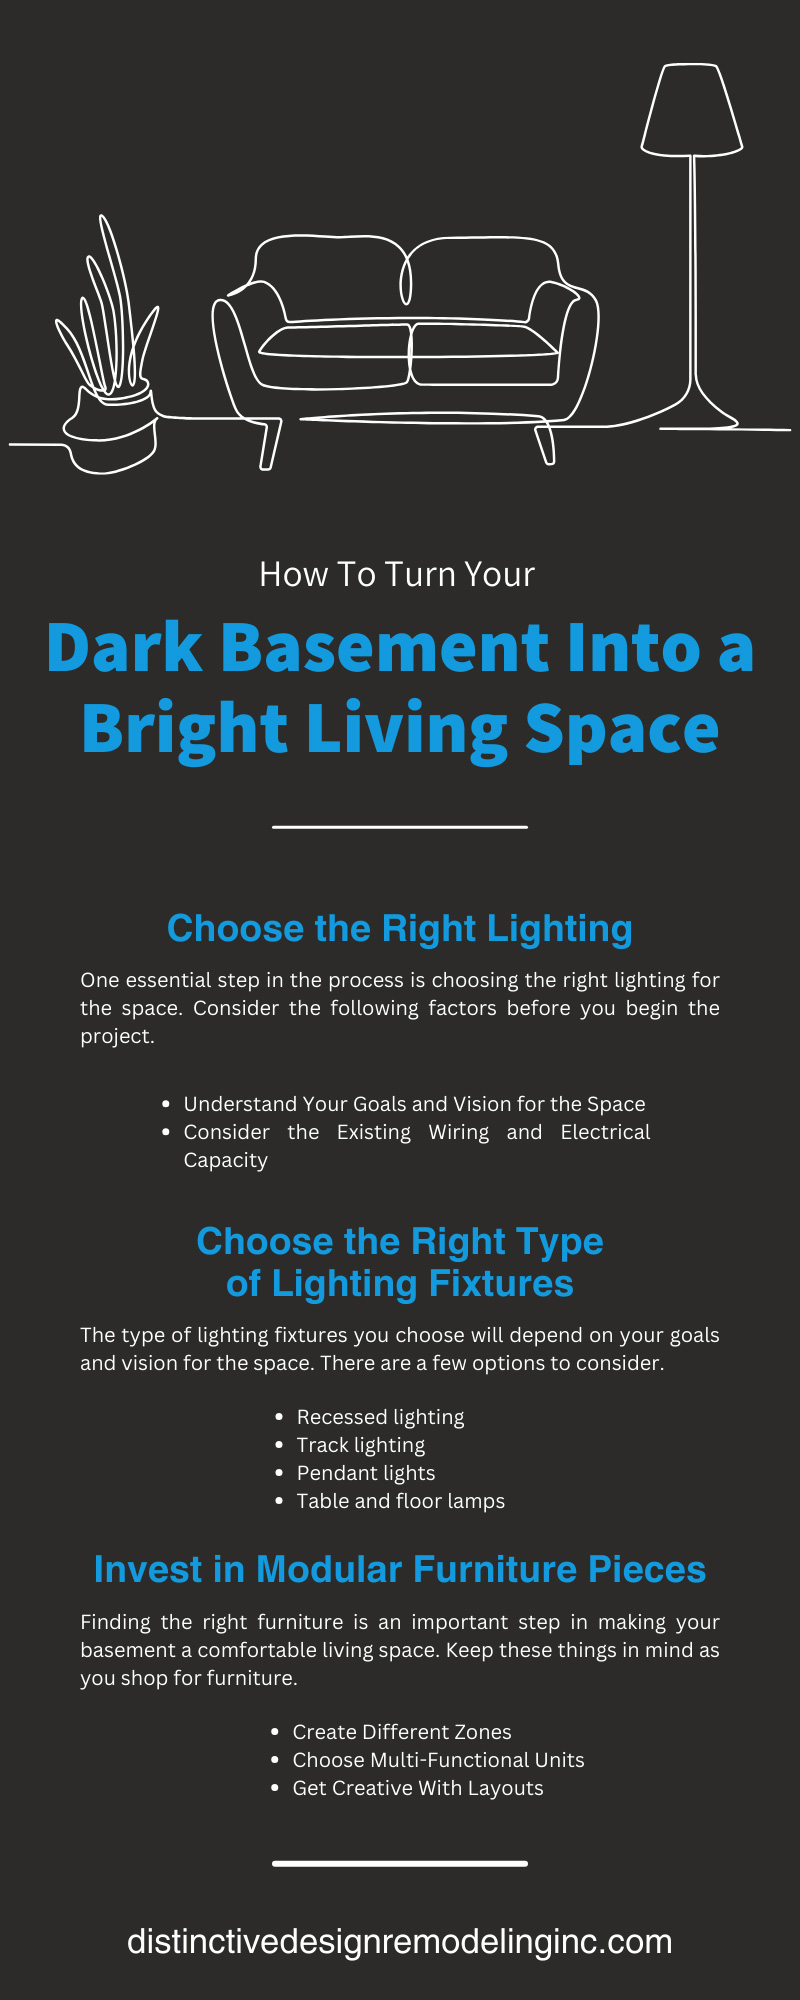 How To Turn Your Dark Basement Into a Bright Living Space